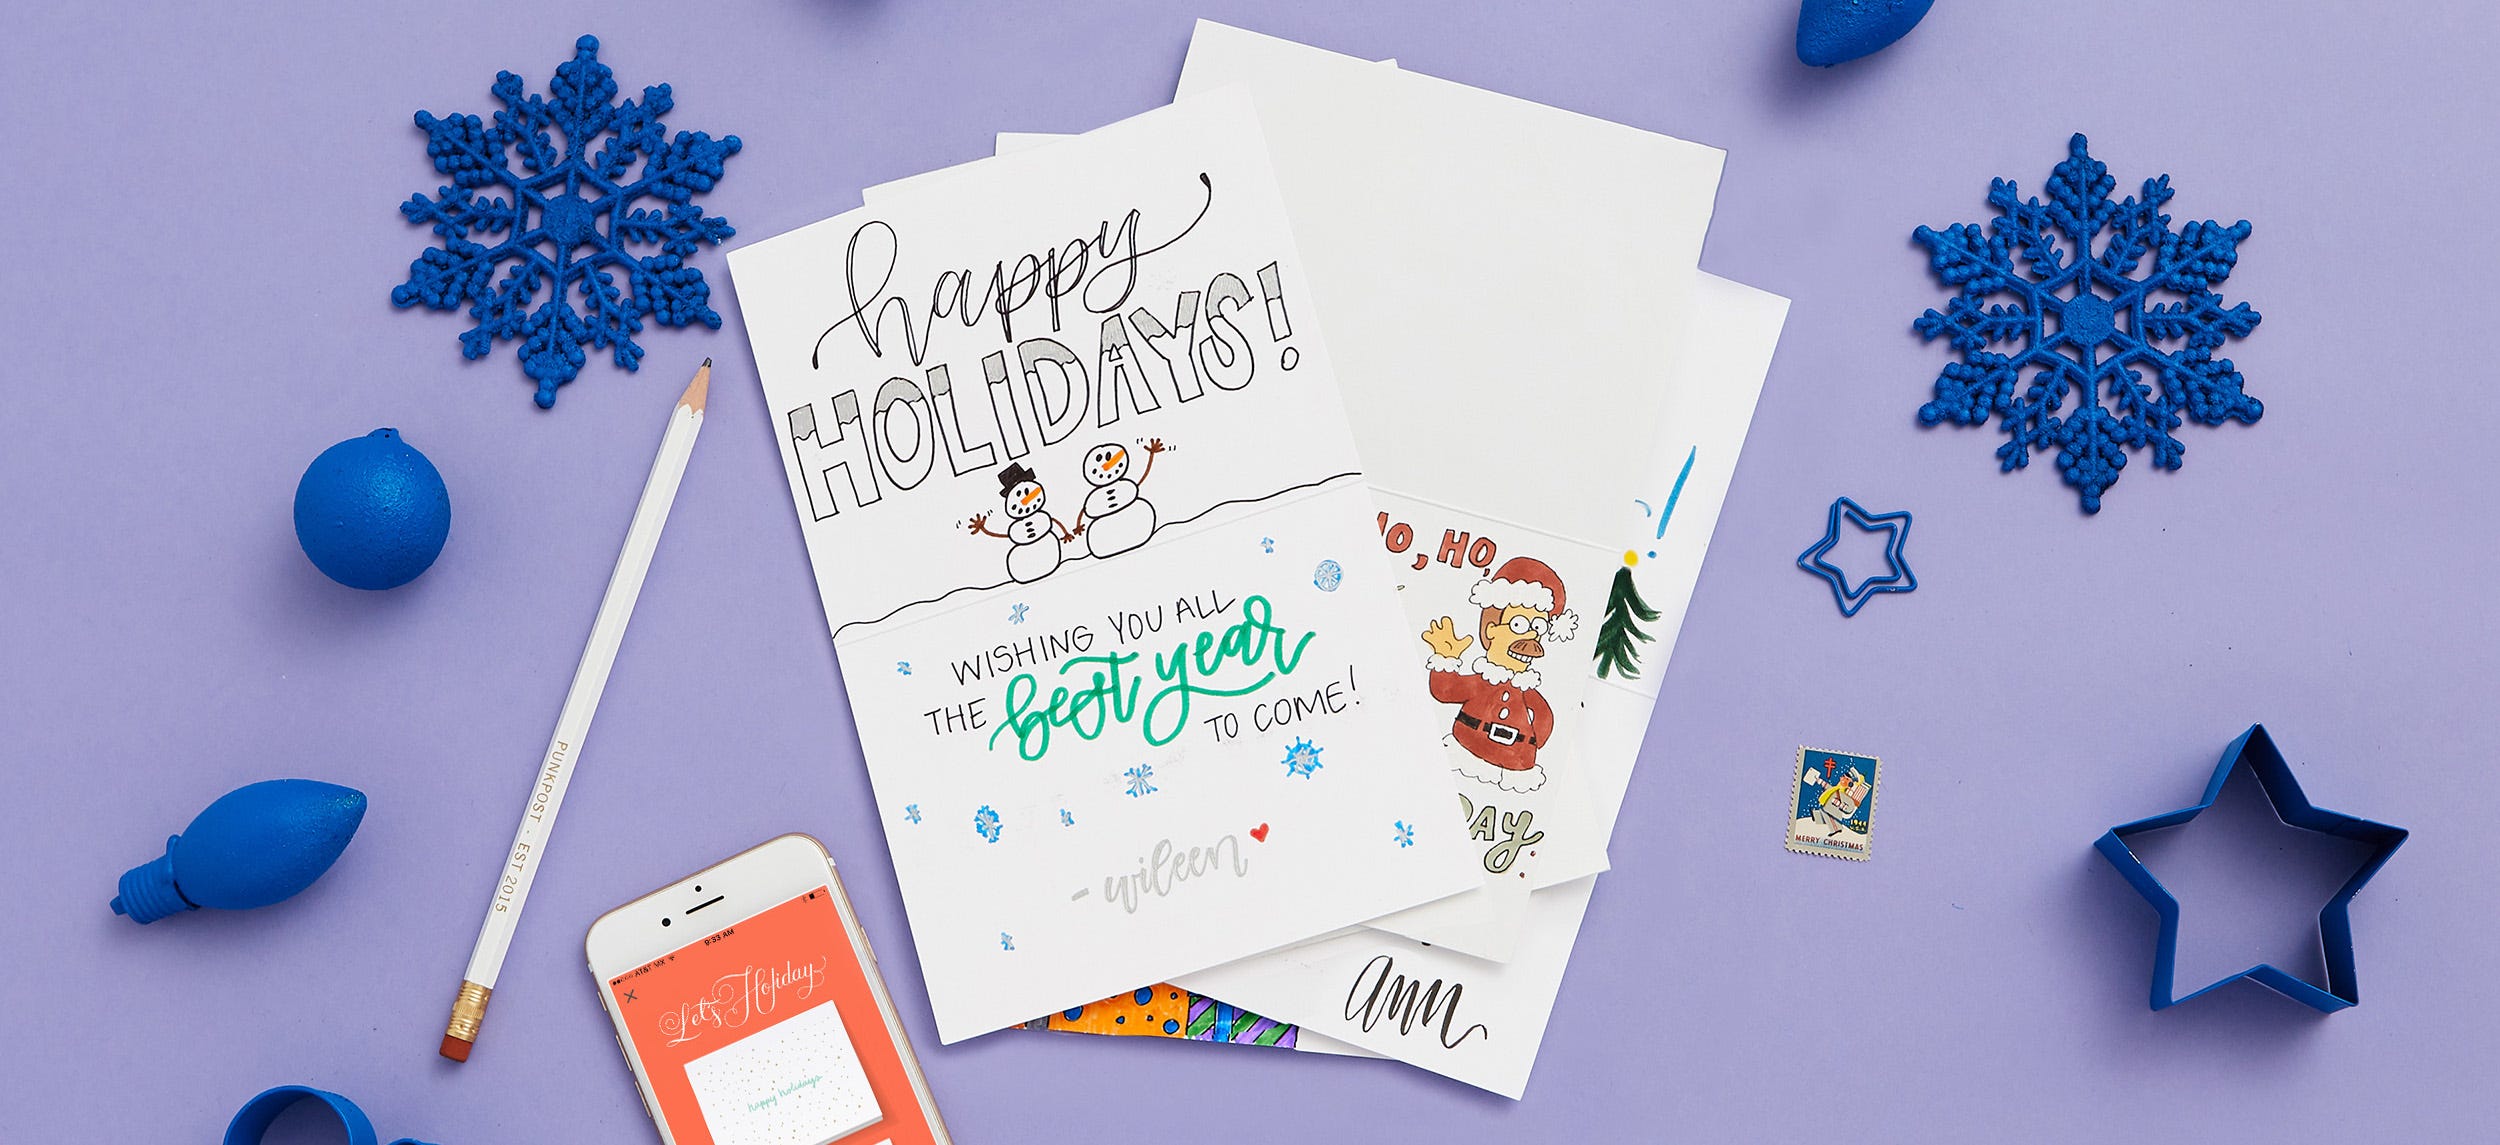 Word Dies For Card Making: How To Add These Easily To Greeting